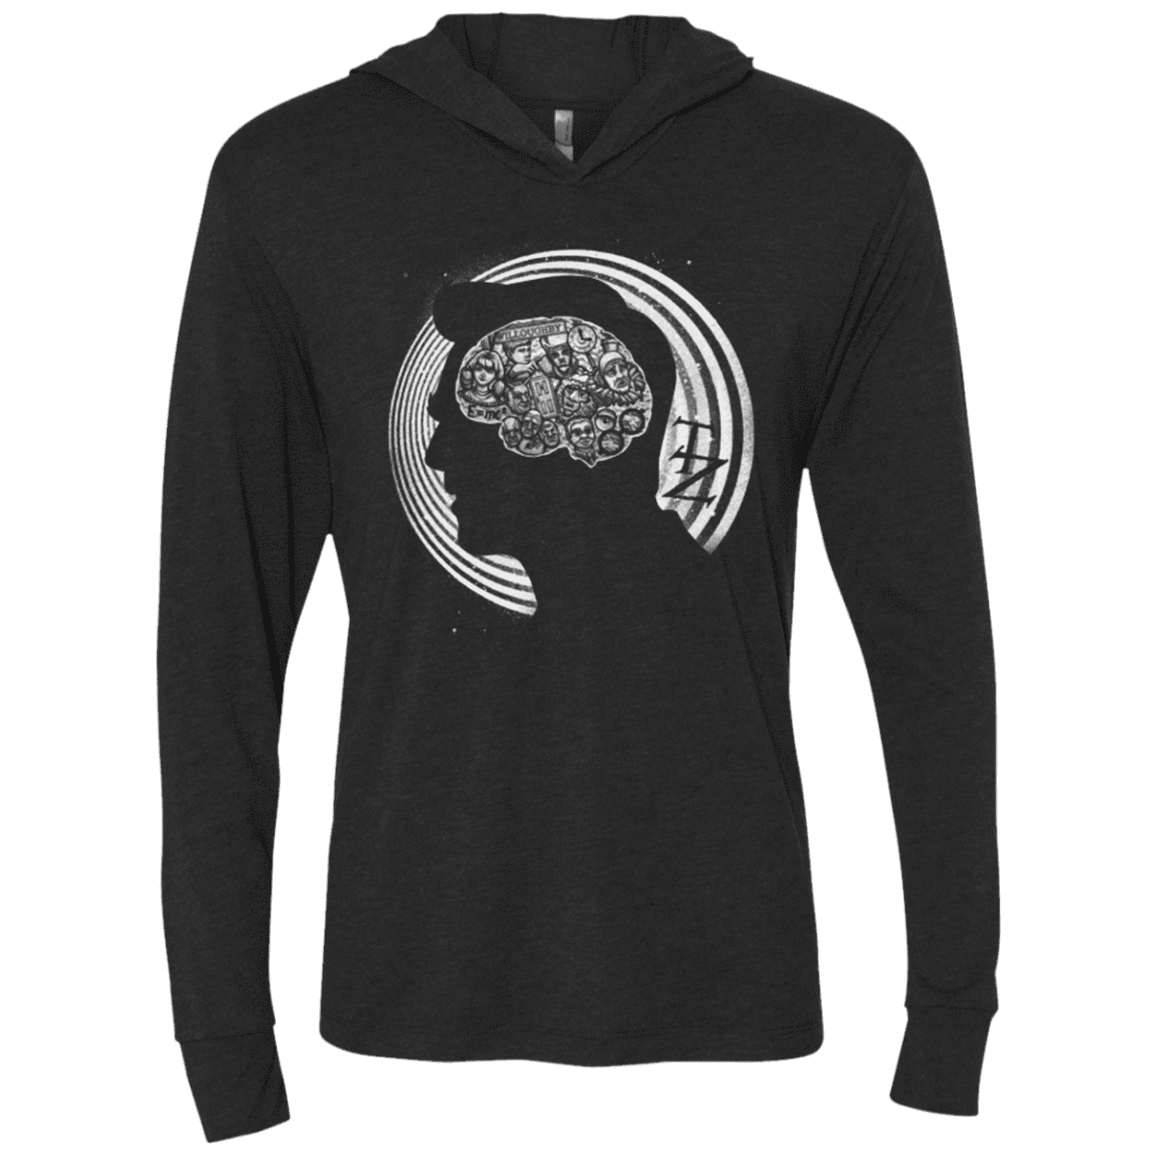 T-Shirts Vintage Black / X-Small A Dimension of Mind Triblend Long Sleeve Hoodie Tee